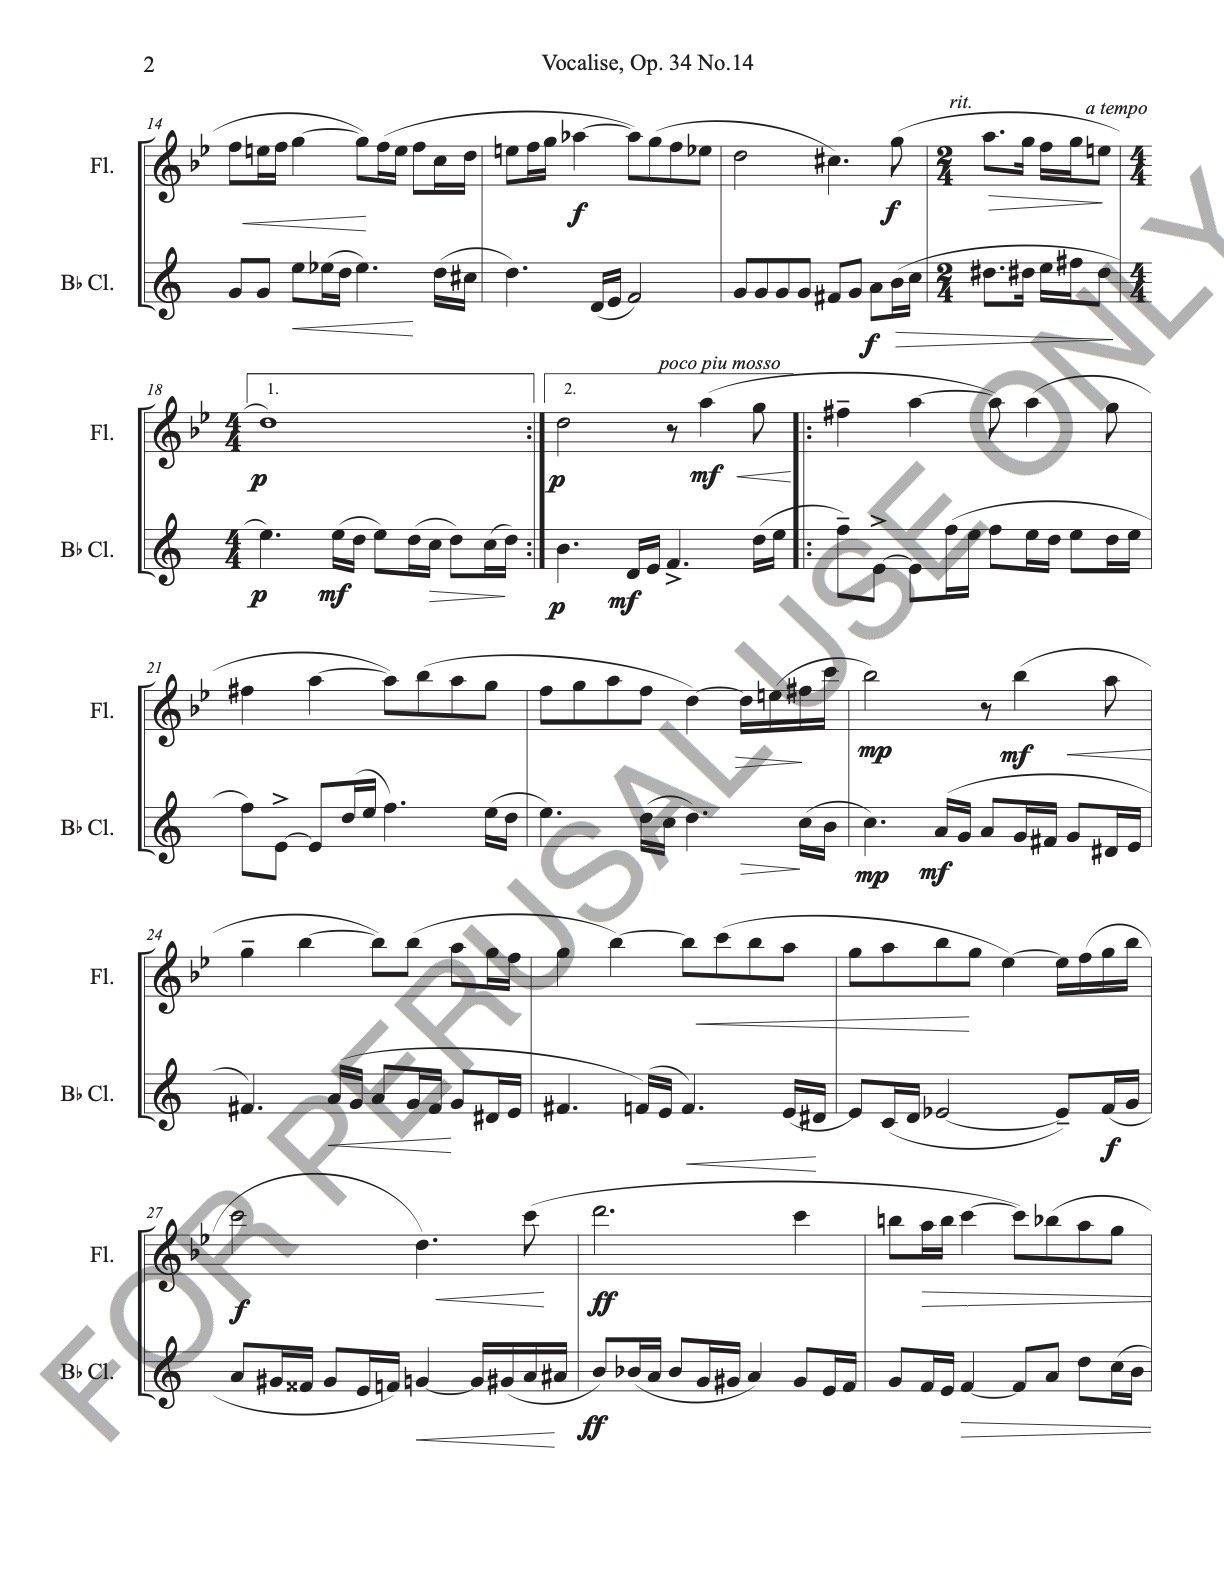 Vocalise, Op. 34 no.14 by Sergei Rachmaninoff for Flute and Clarinet Duet (score+parts) - ChaipruckMekara